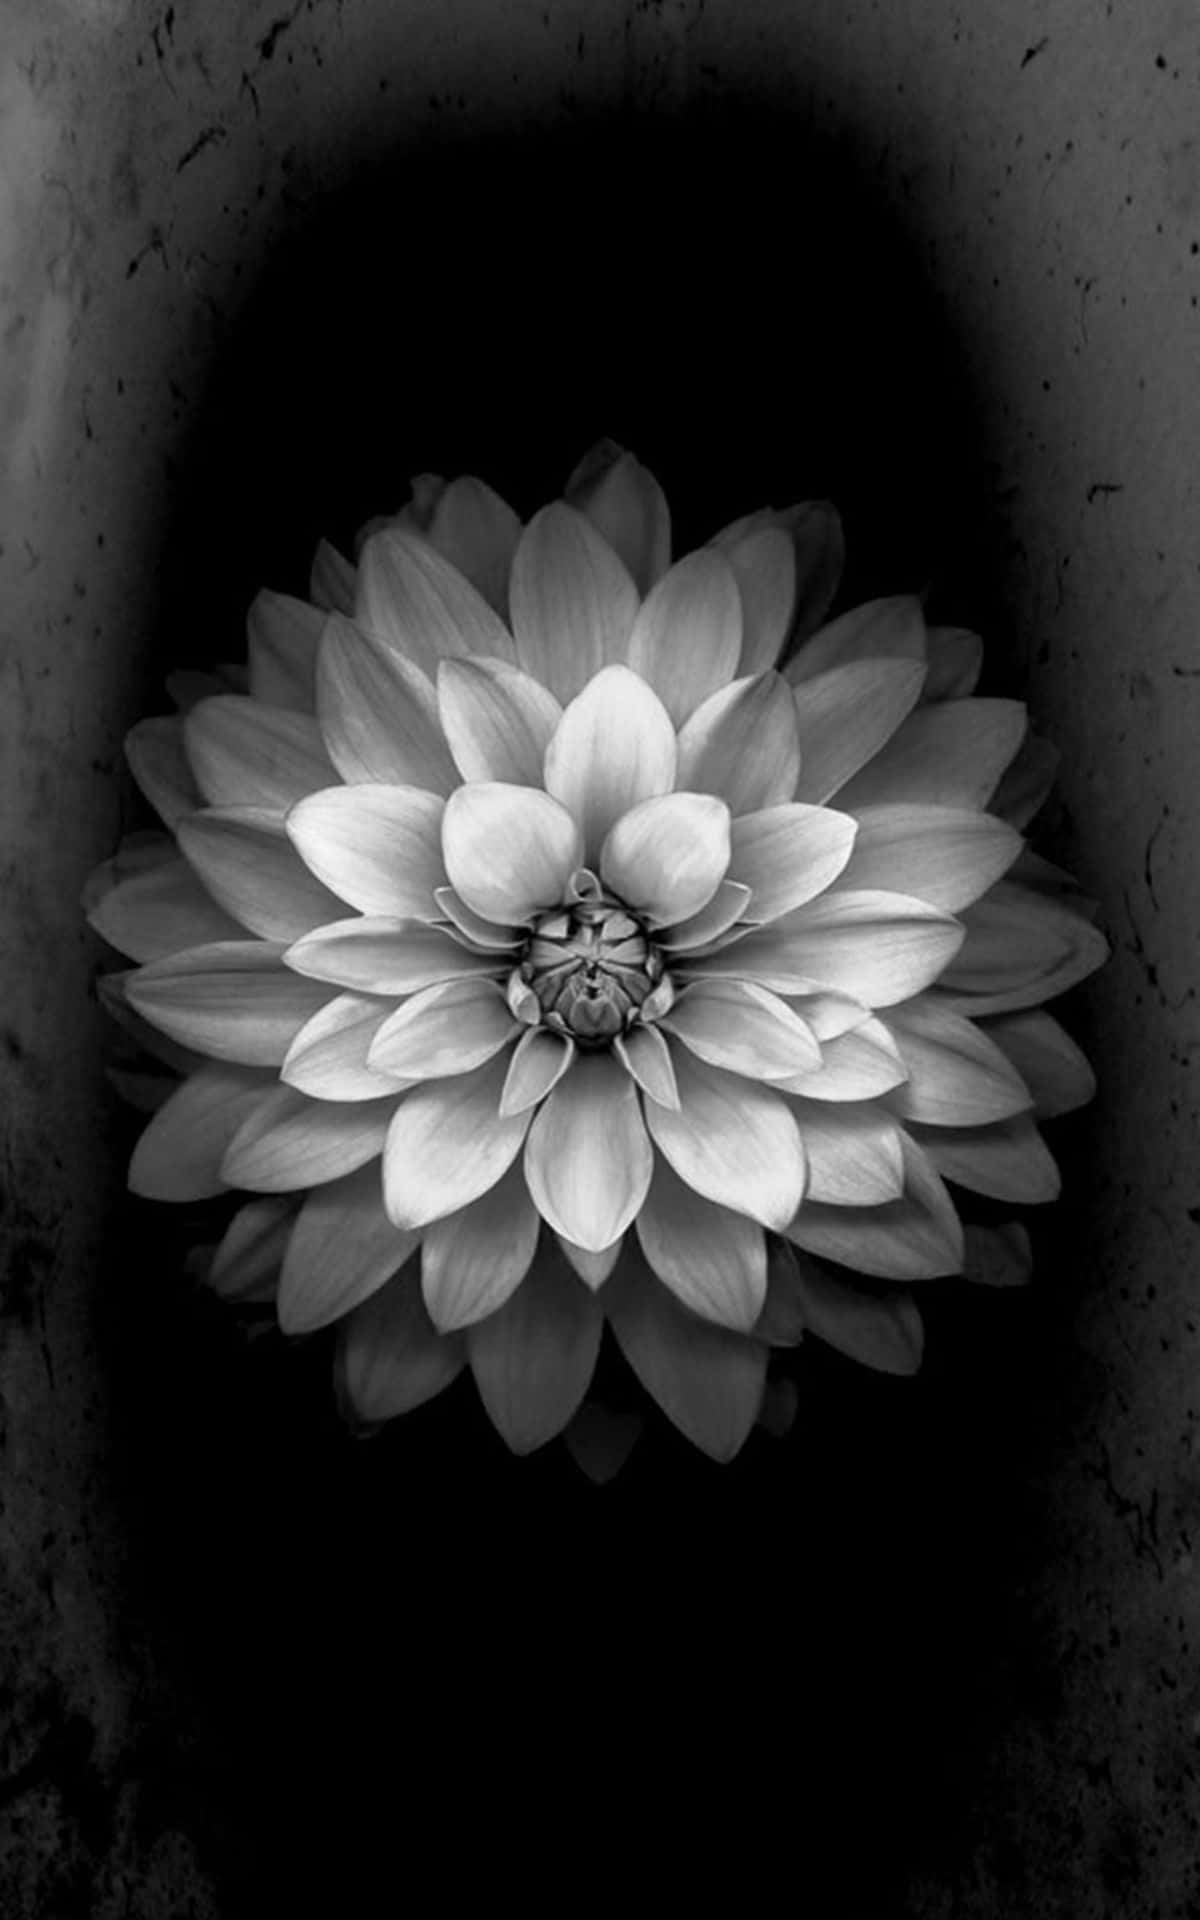 Black And White Lotus Flower Iphone Wallpaper